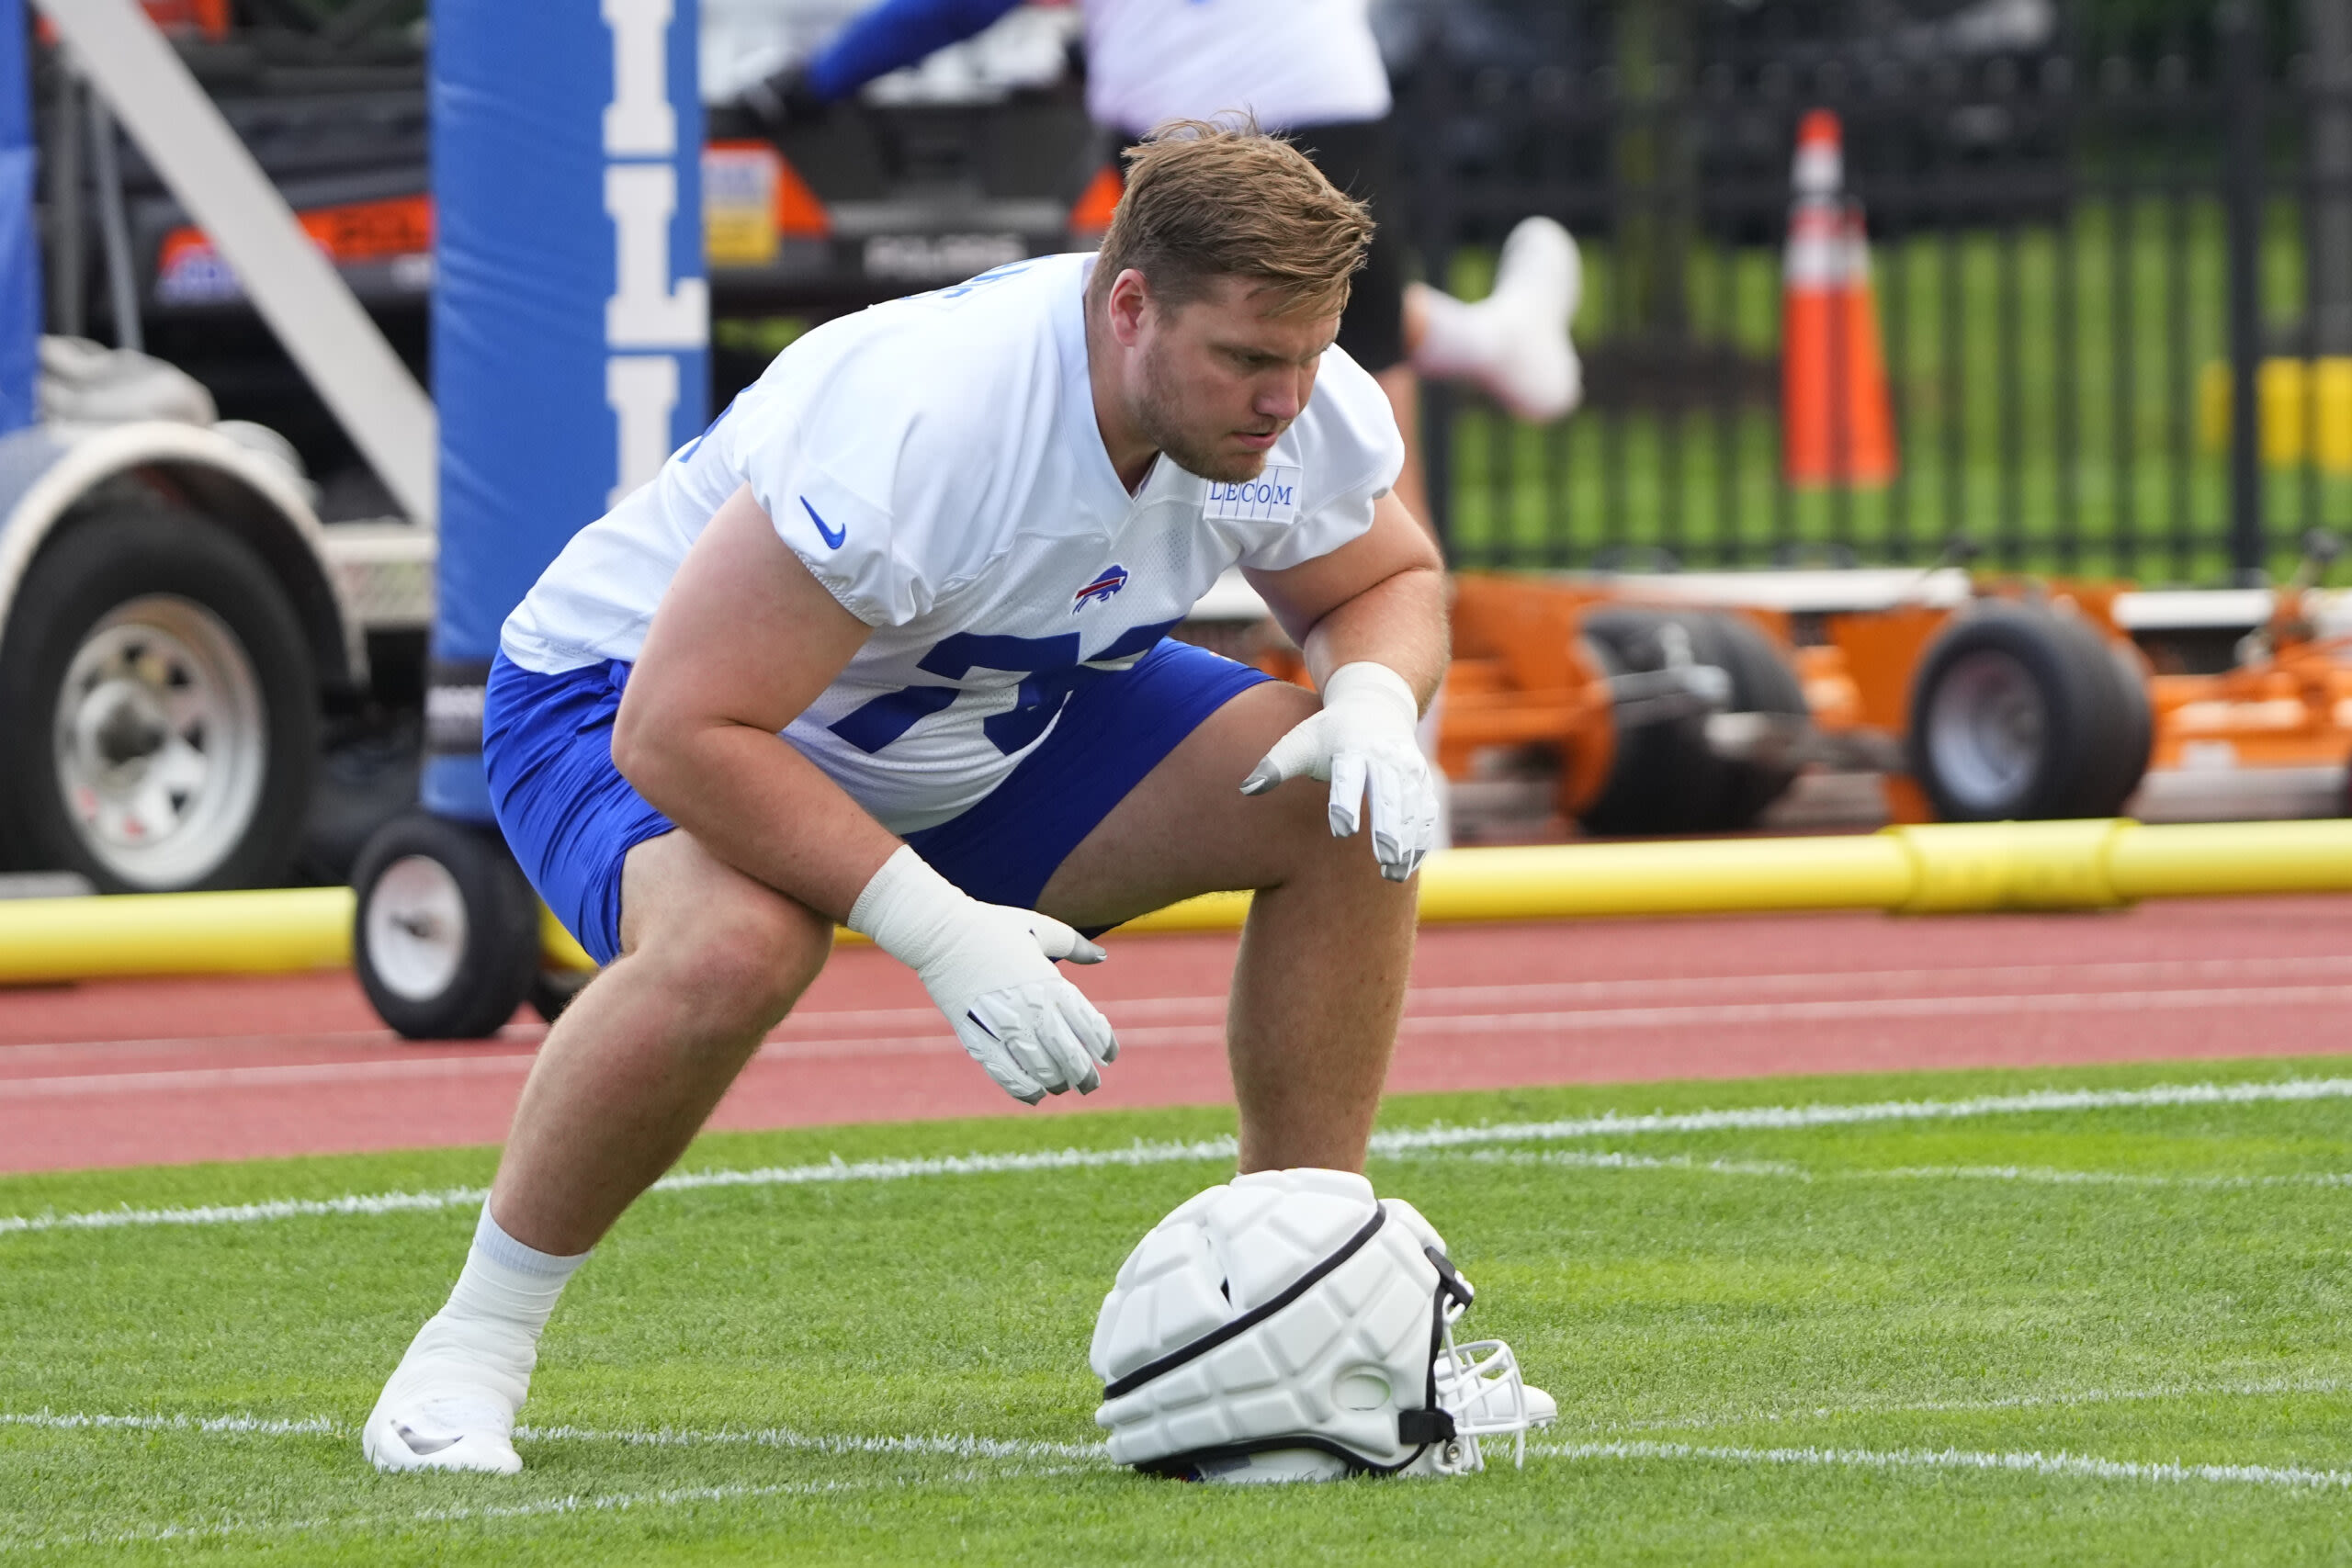 Bills players working out again this week at offseason practice (video)